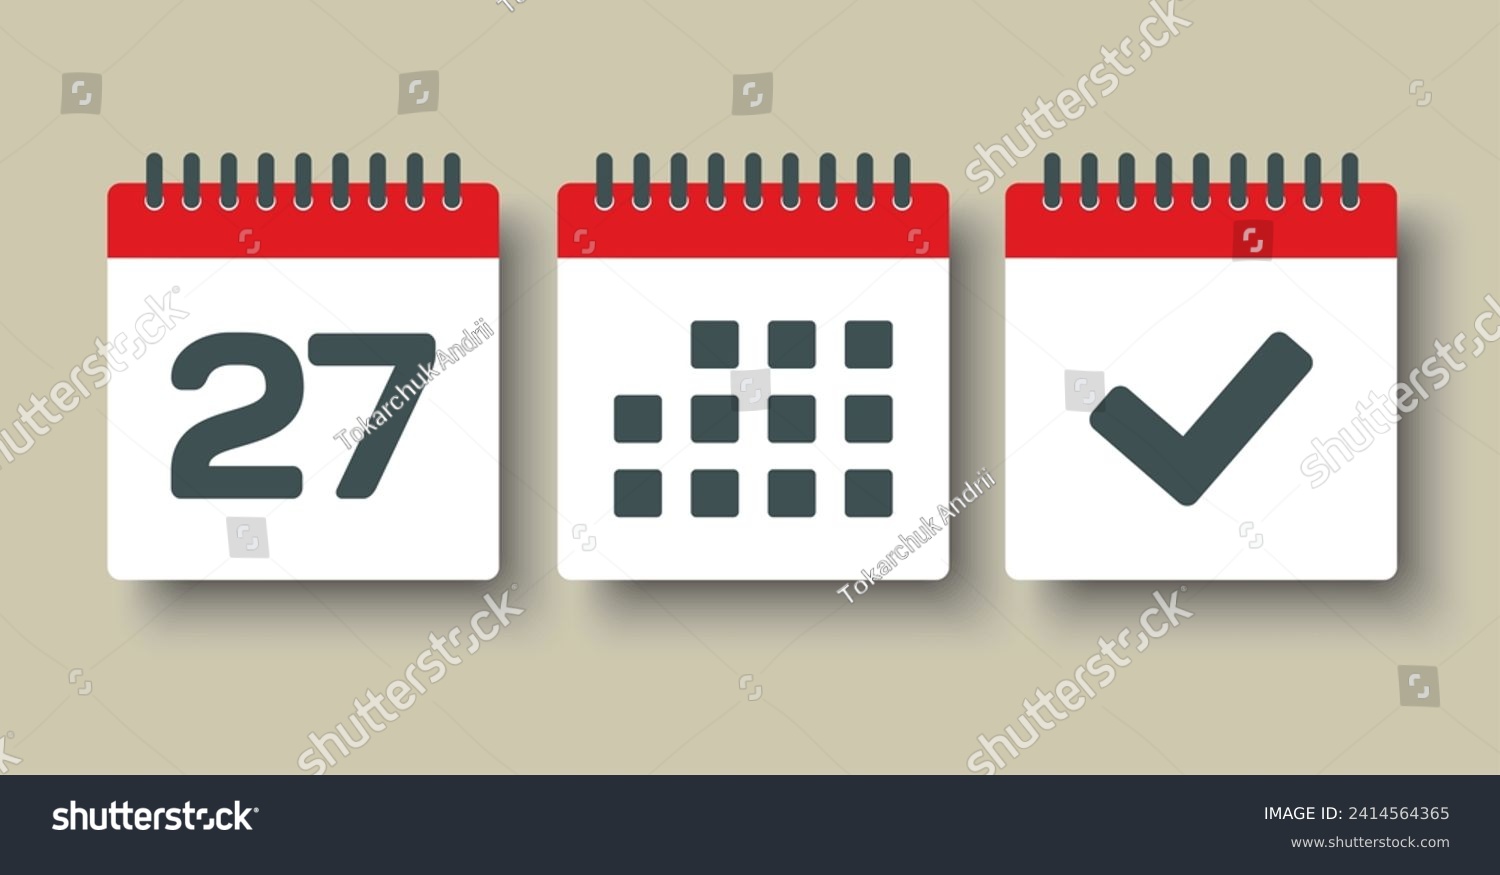 SVG of Set vector icons page calendar - day 27, mark done, agenda app. Mark business, deadline, date icon. Pictogram yes, success, check, approved, confirm and reminder. Date schedule svg